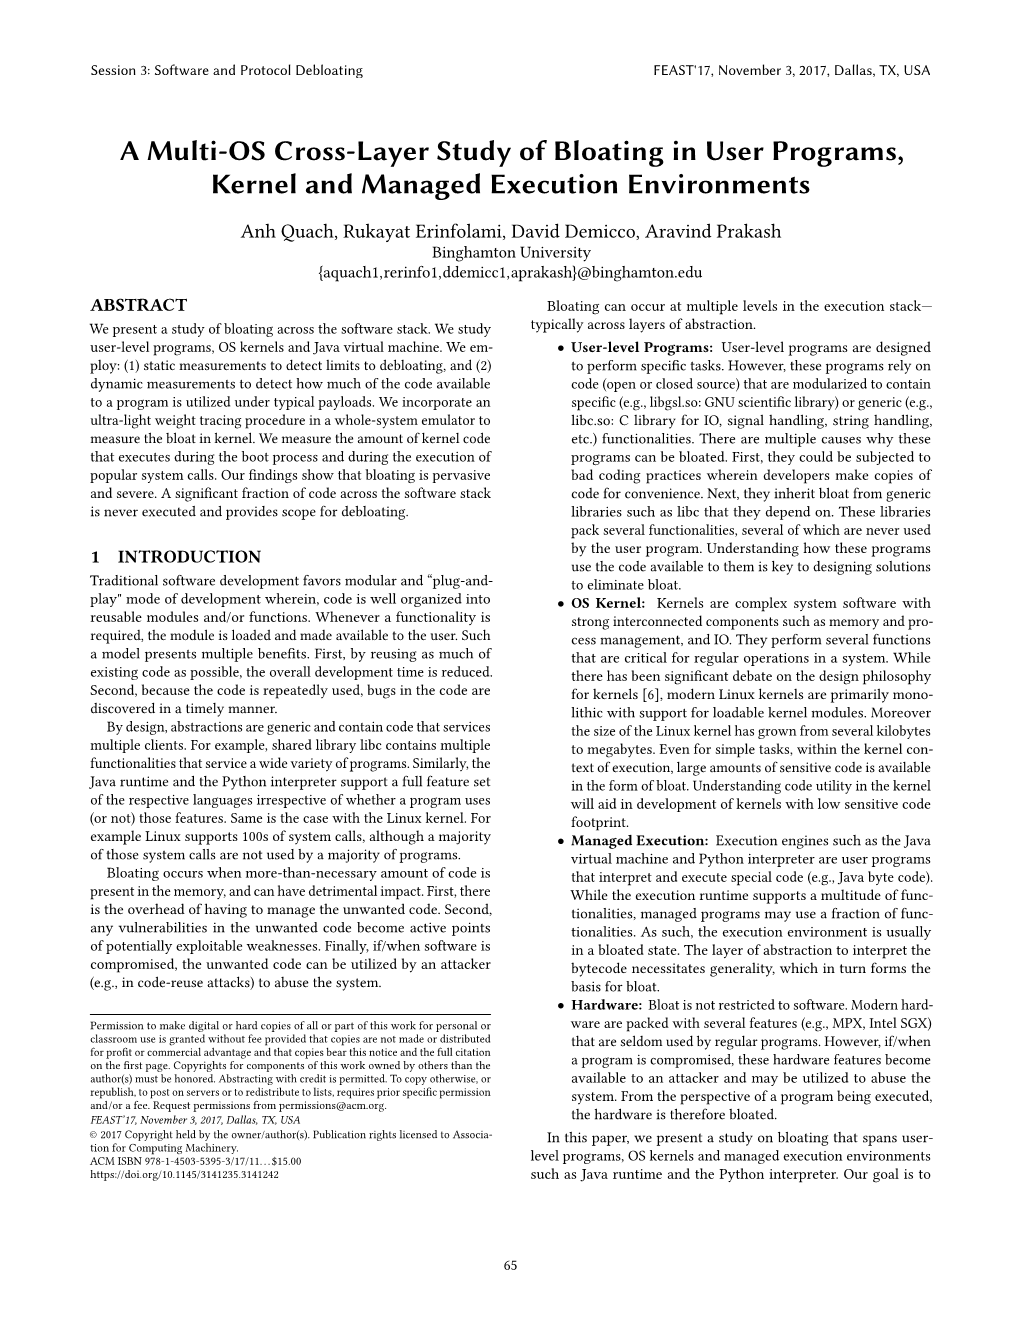 A Multi-OS Cross-Layer Study of Bloating in User Programs, Kernel and Managed Execution Environments